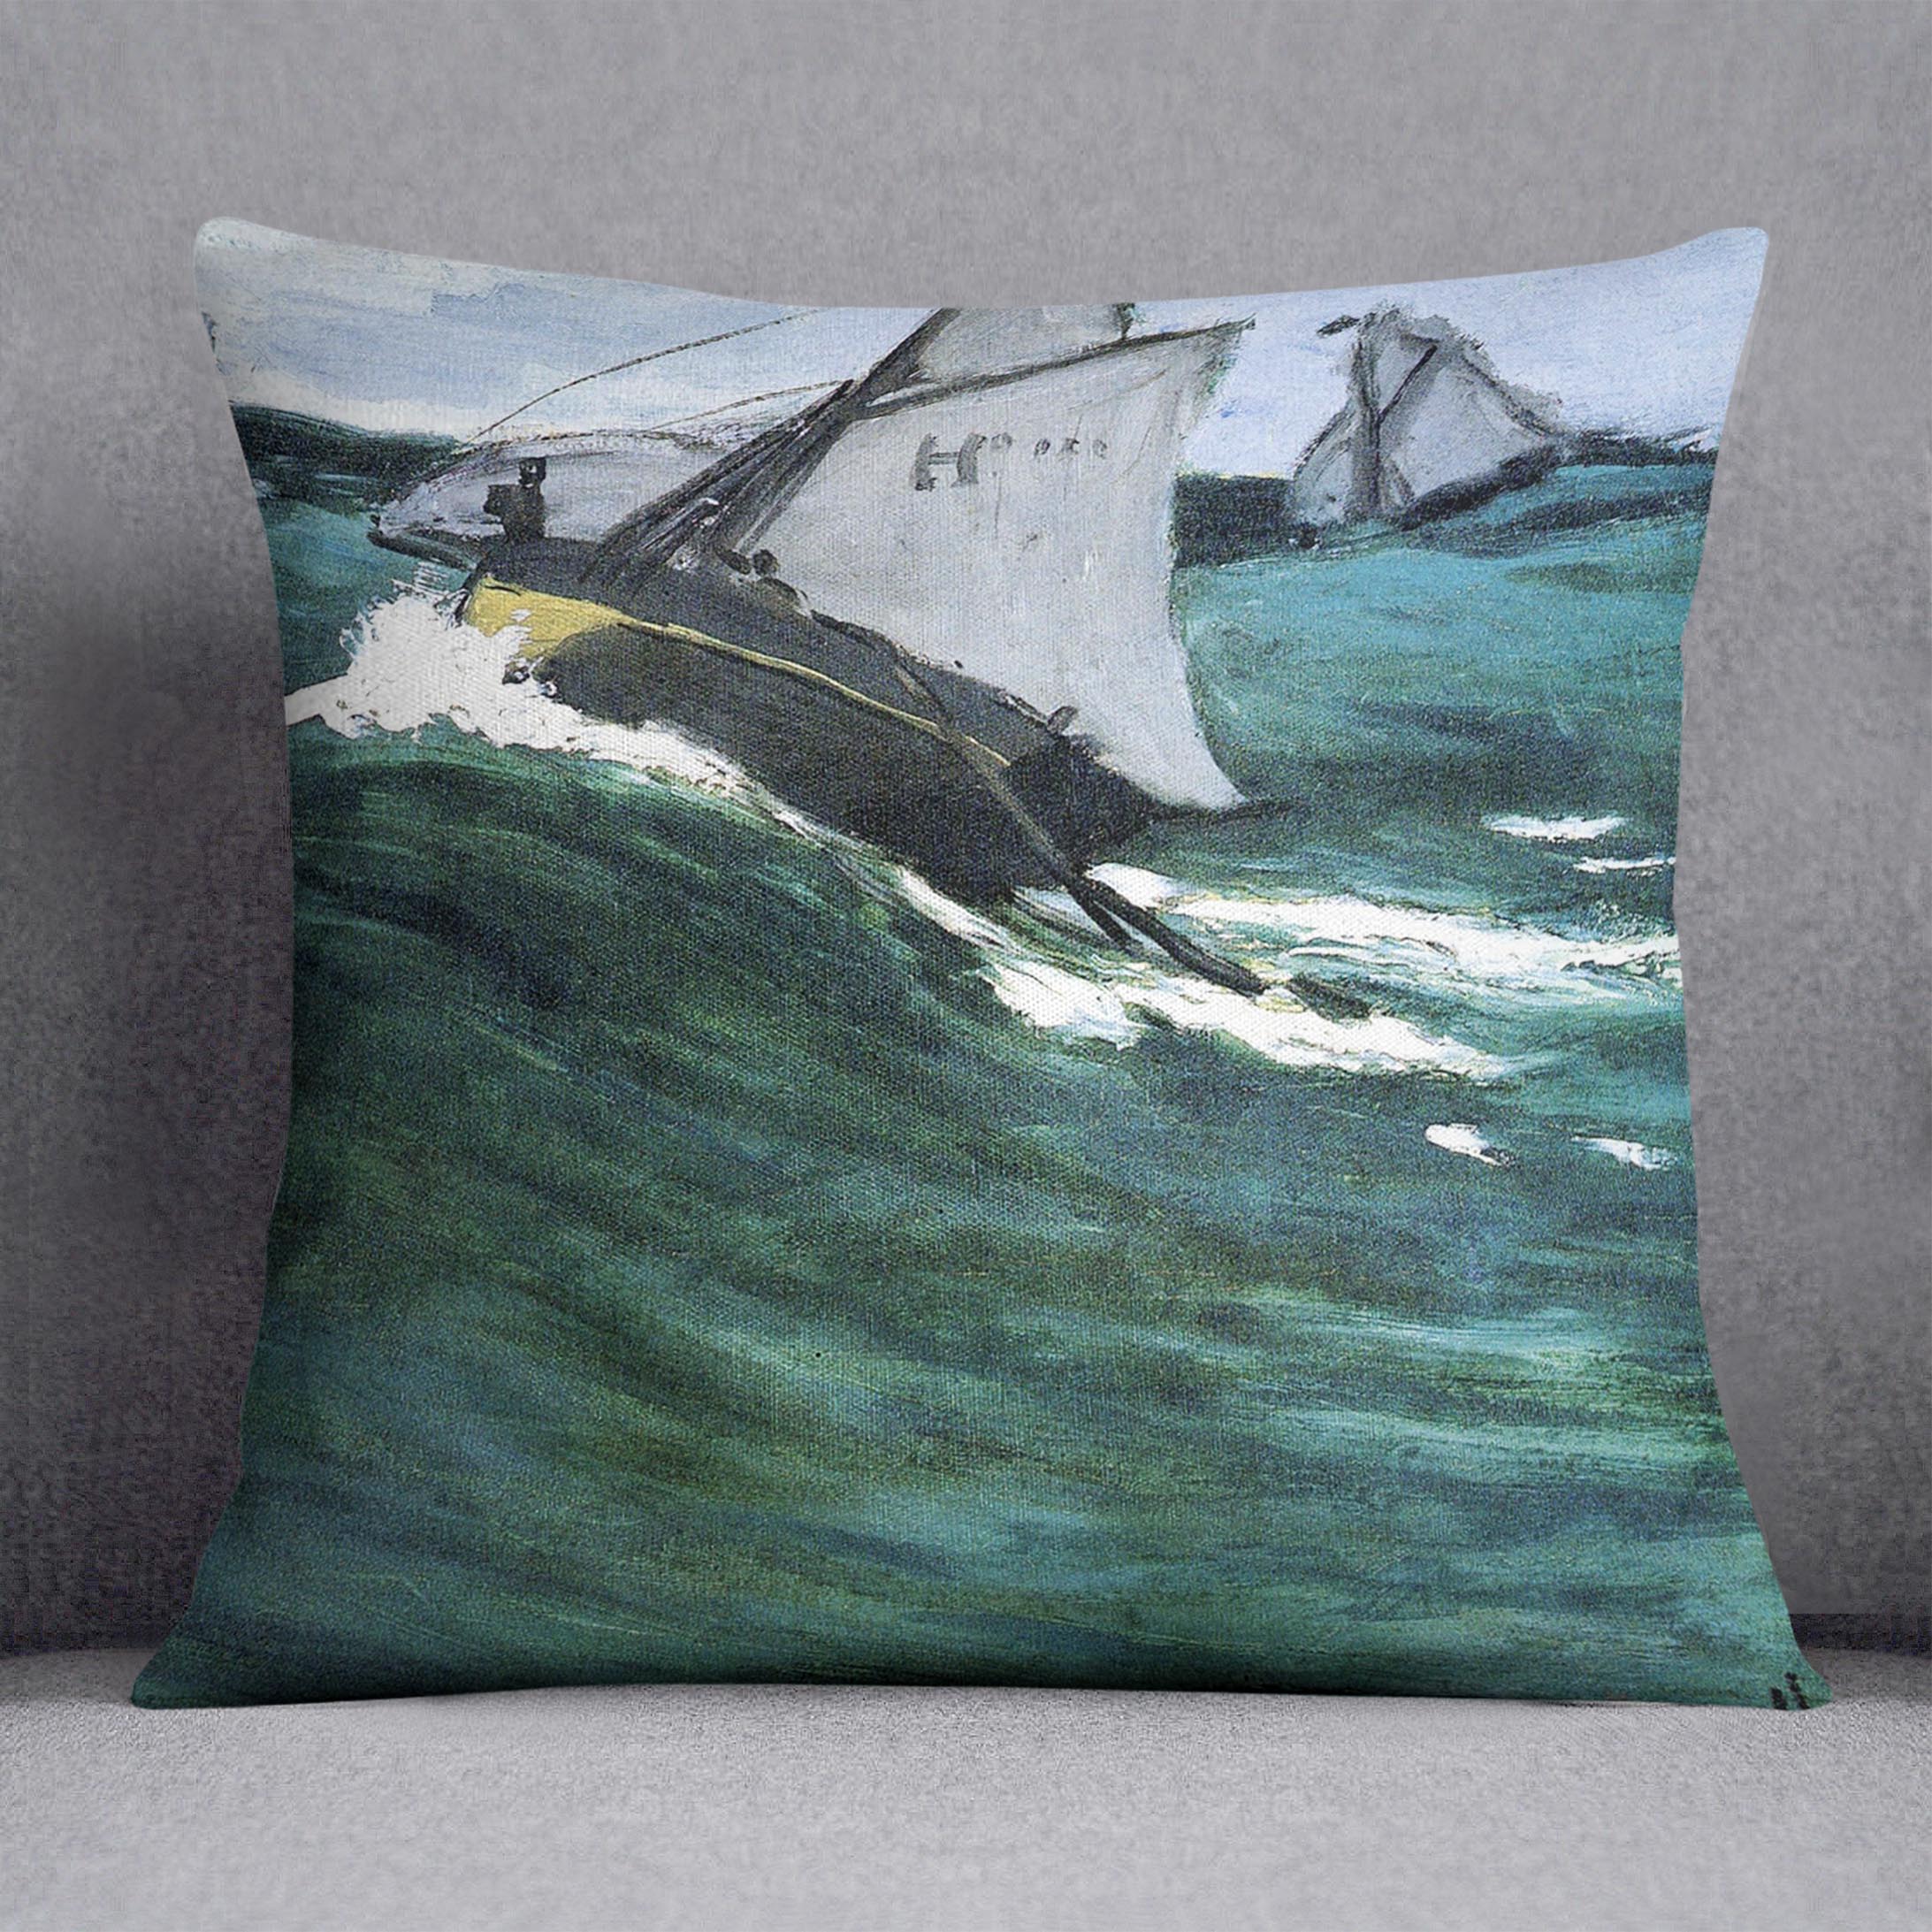 The green wave by Monet Cushion